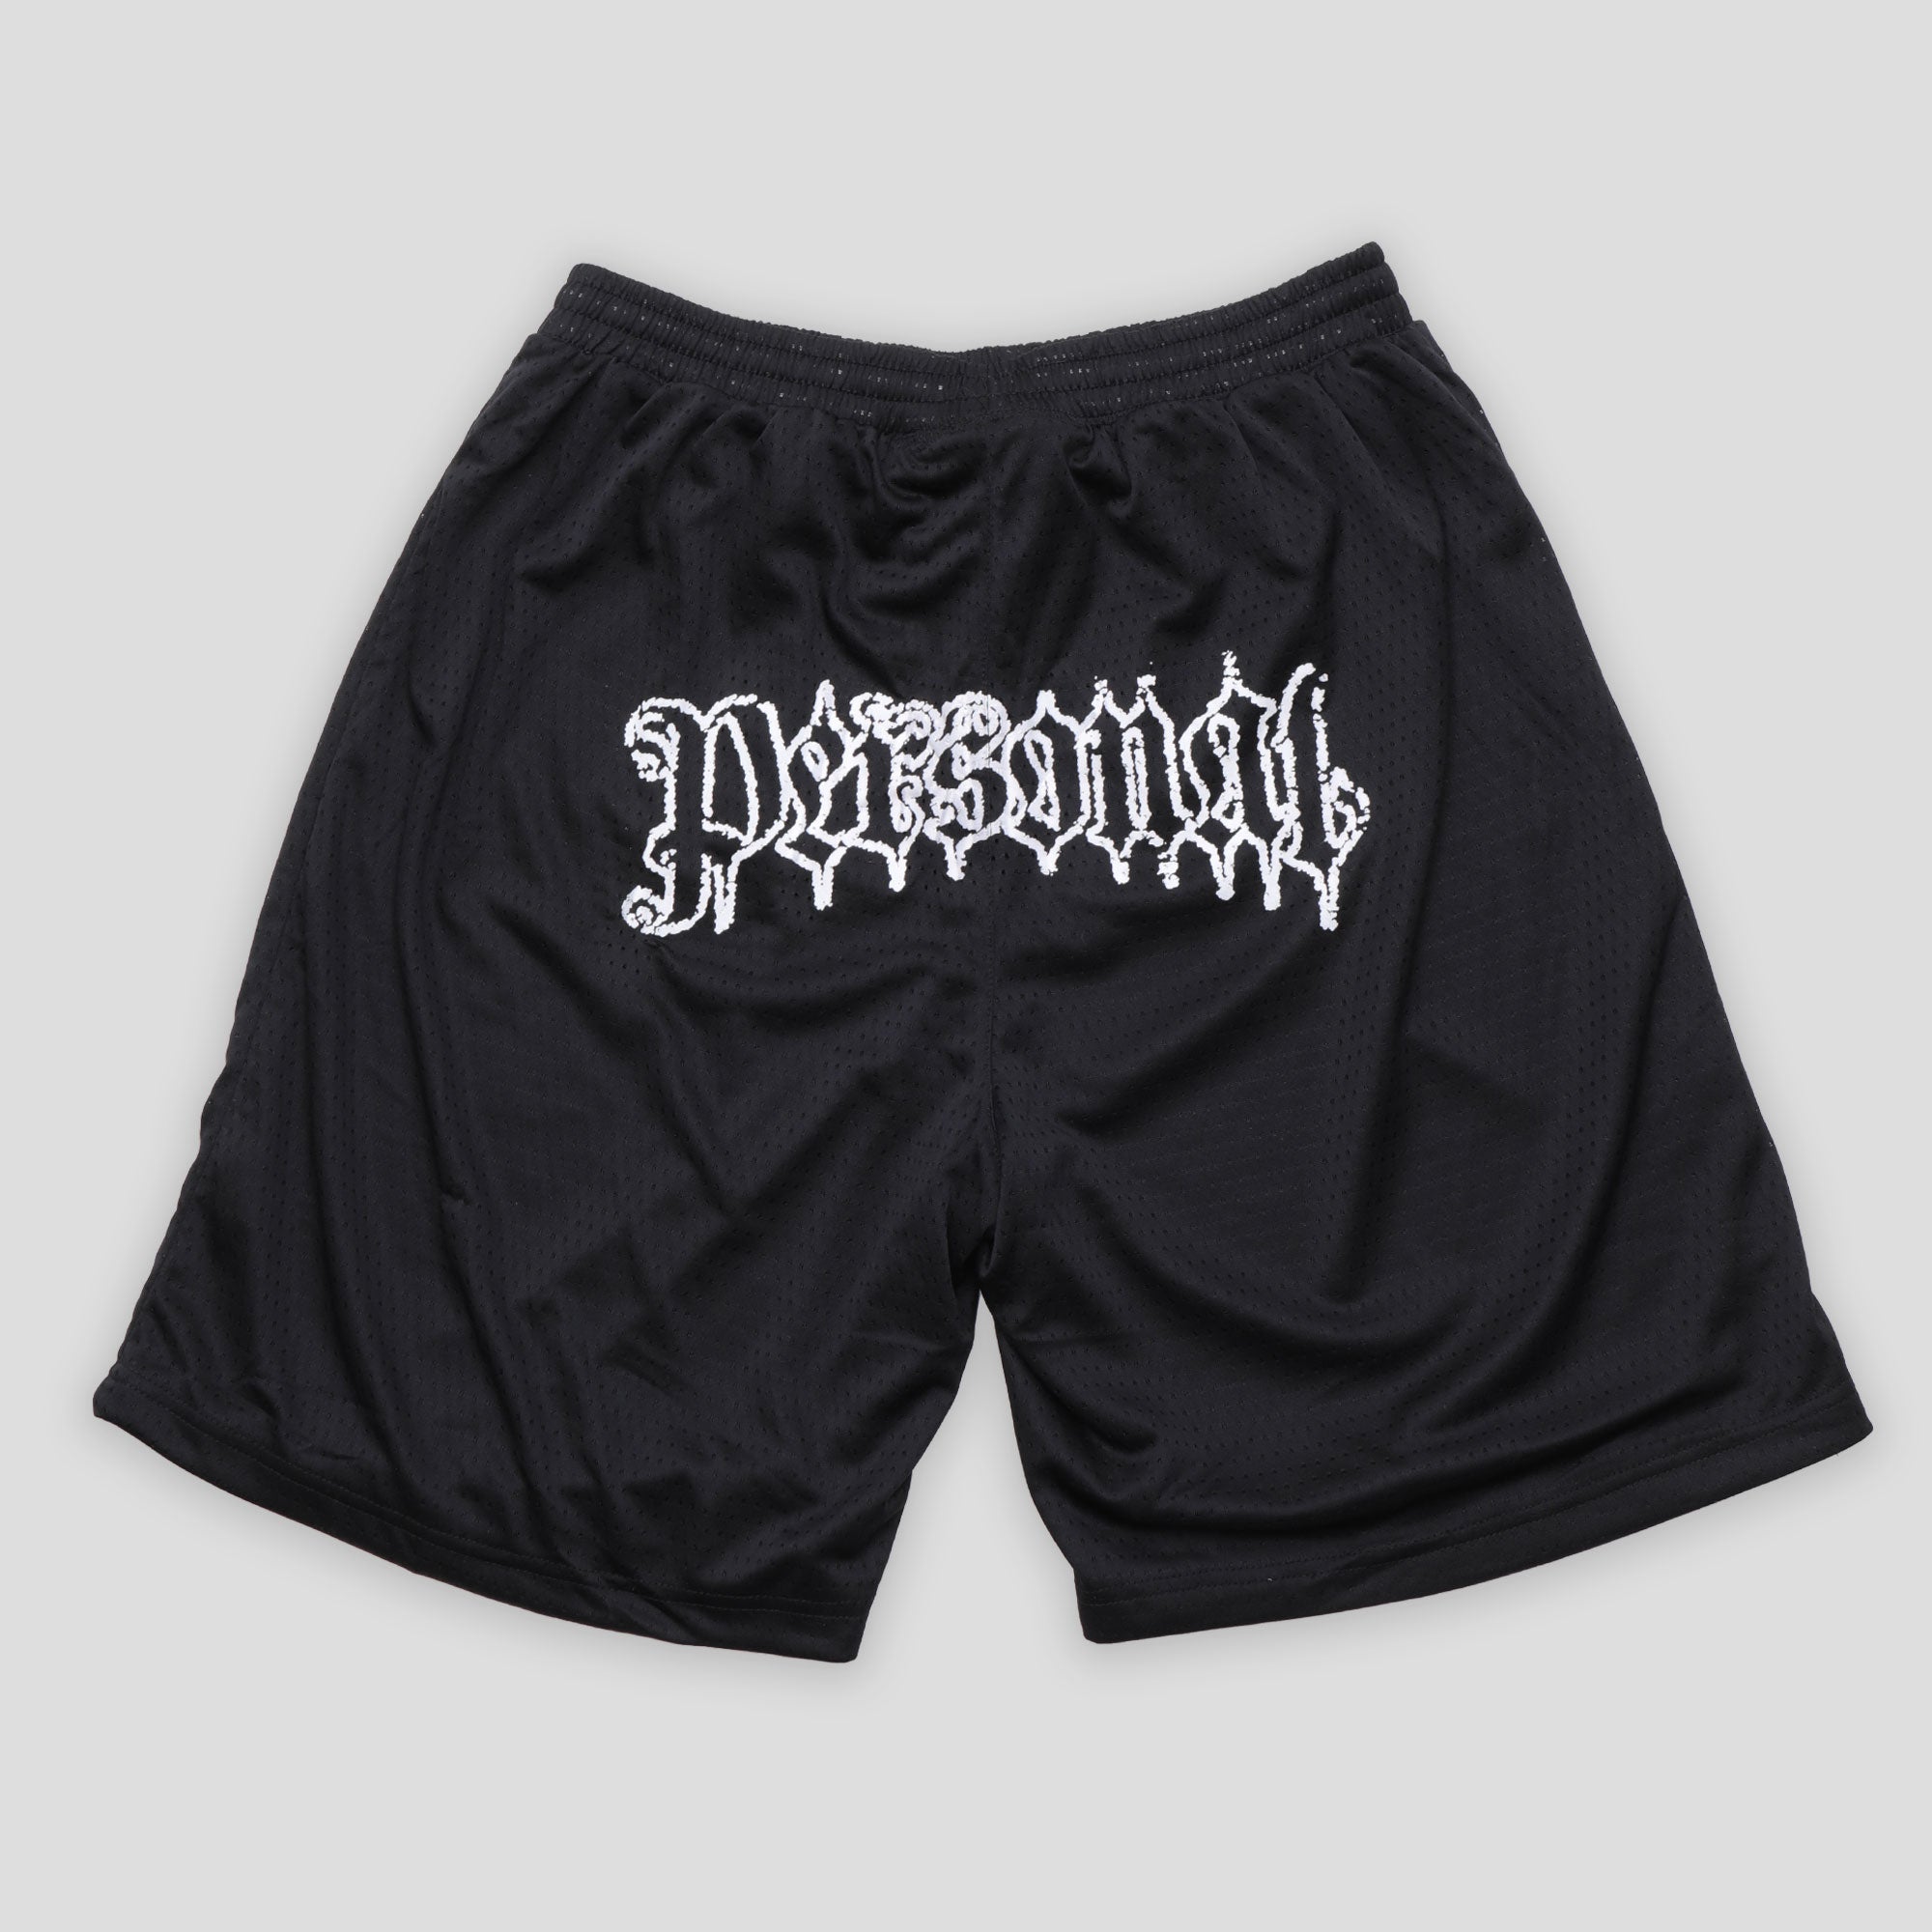 Personal Joint Grudge Girl Basket Ball Shorts - Black